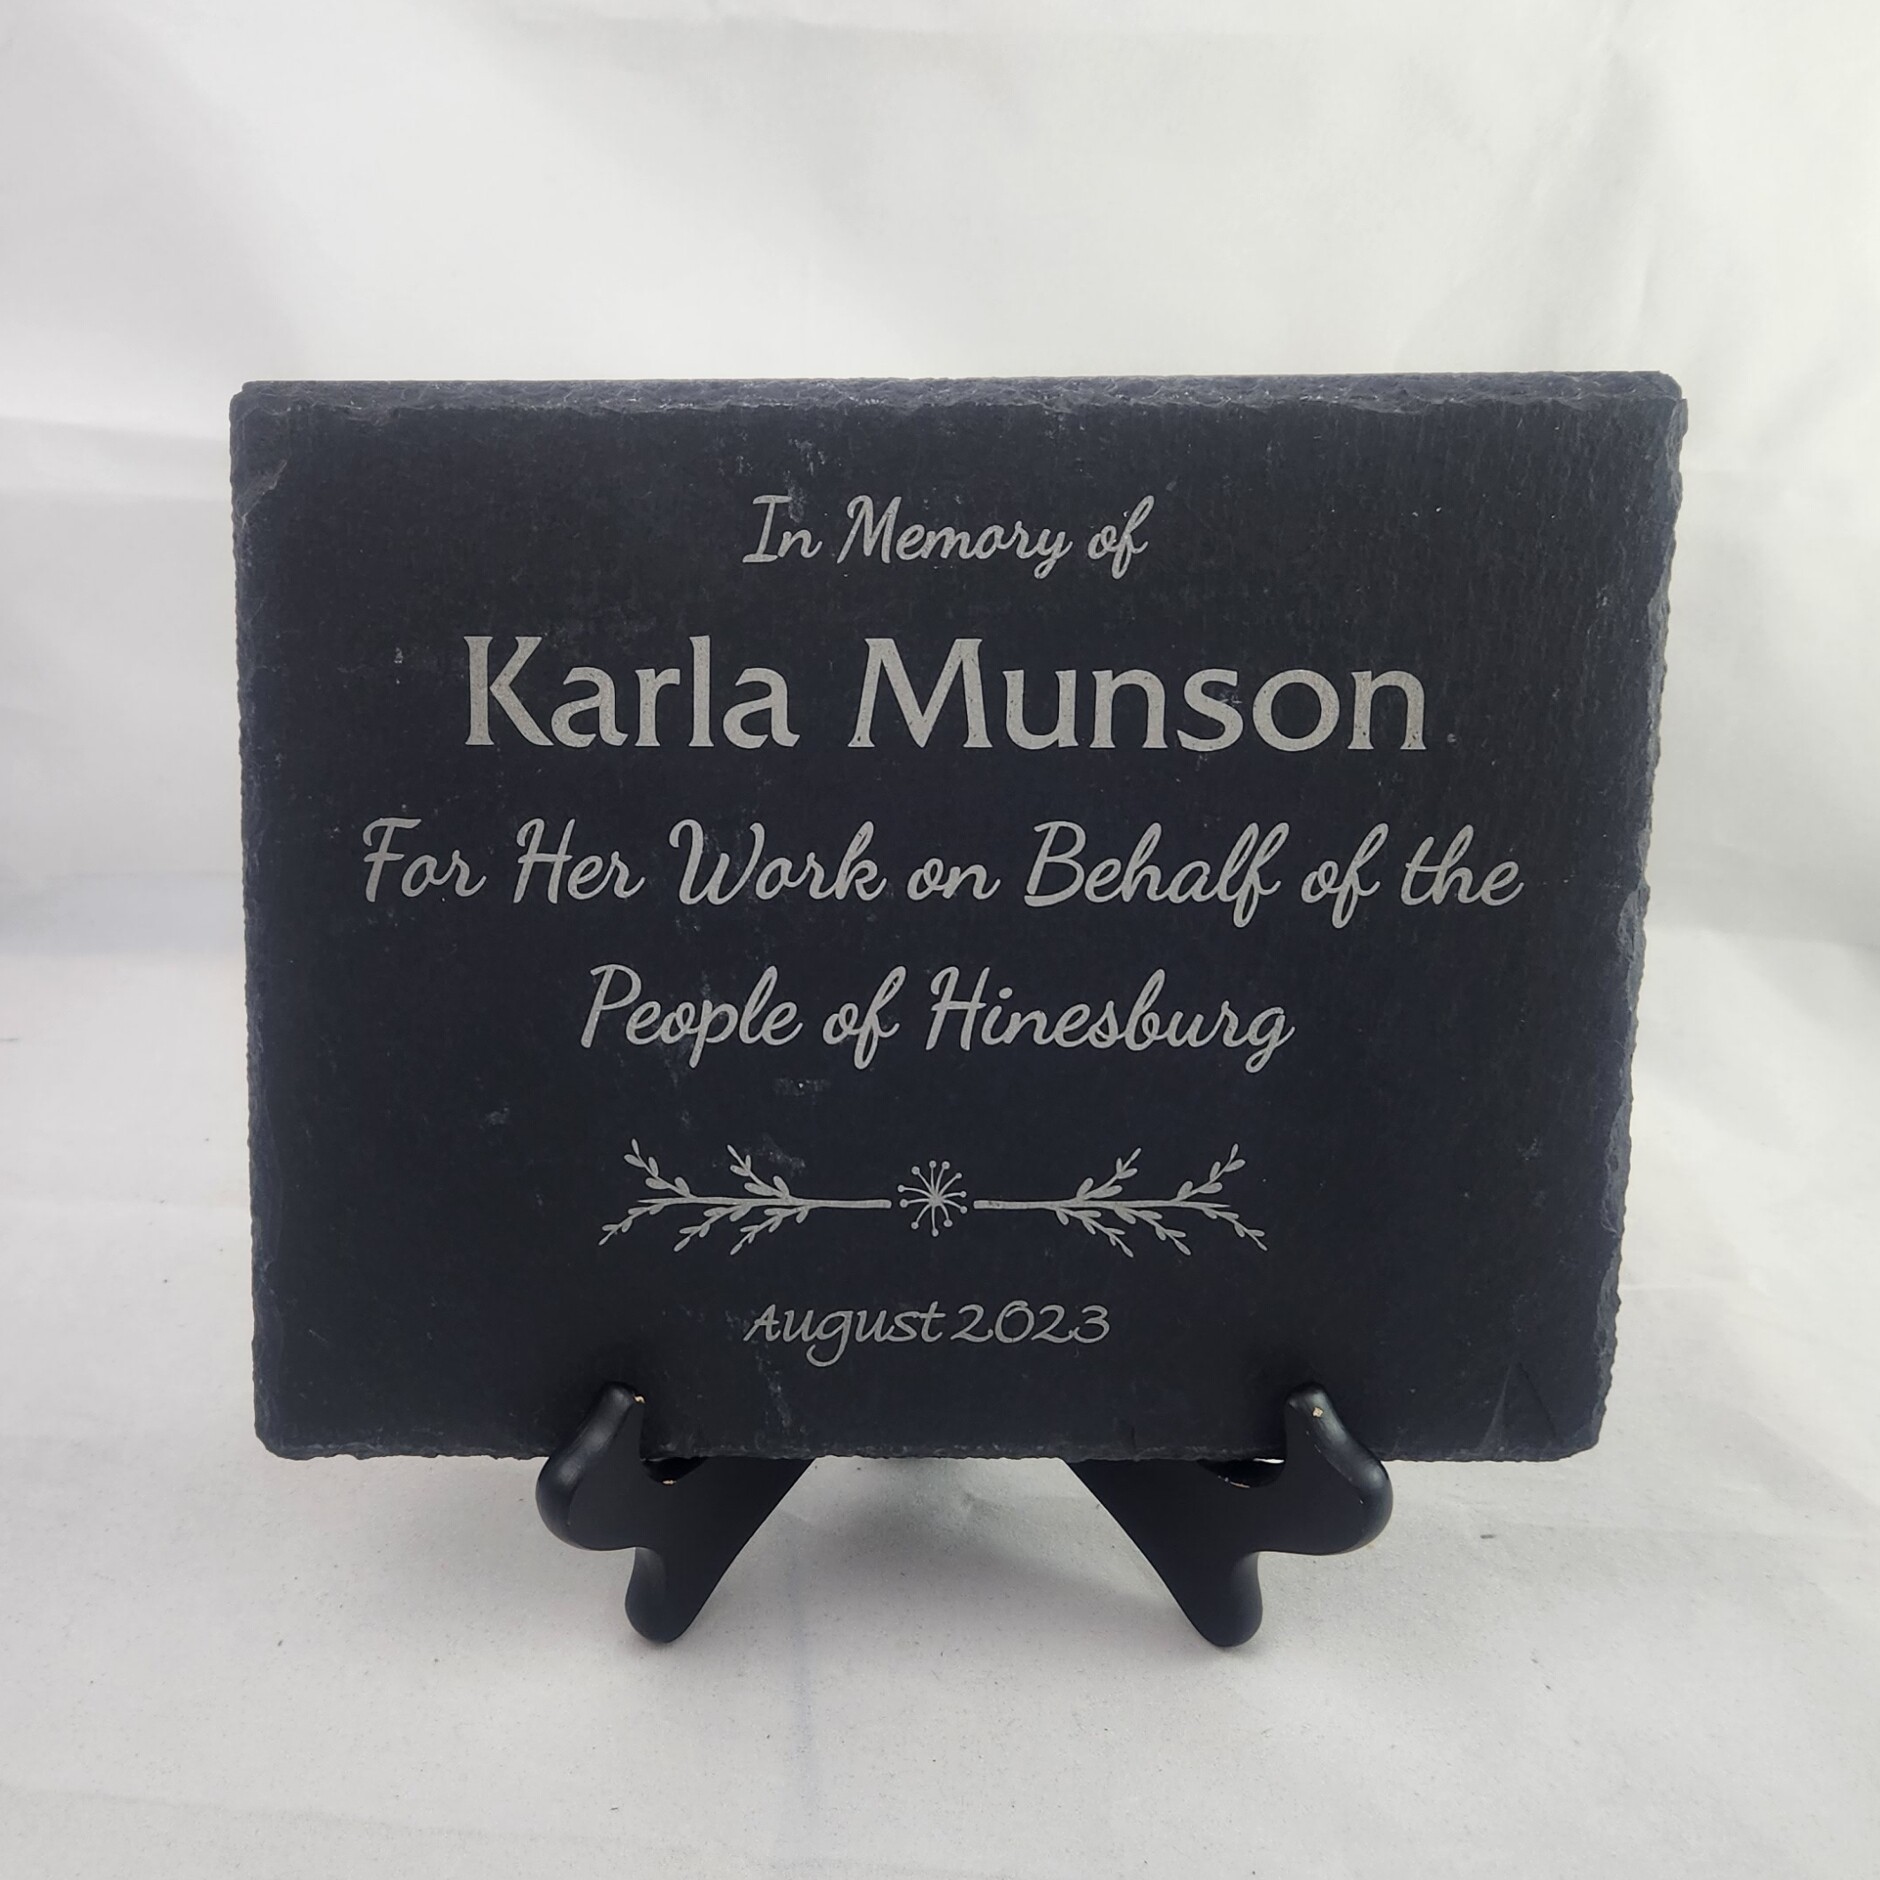 Laserable Slate Sign or Plaque